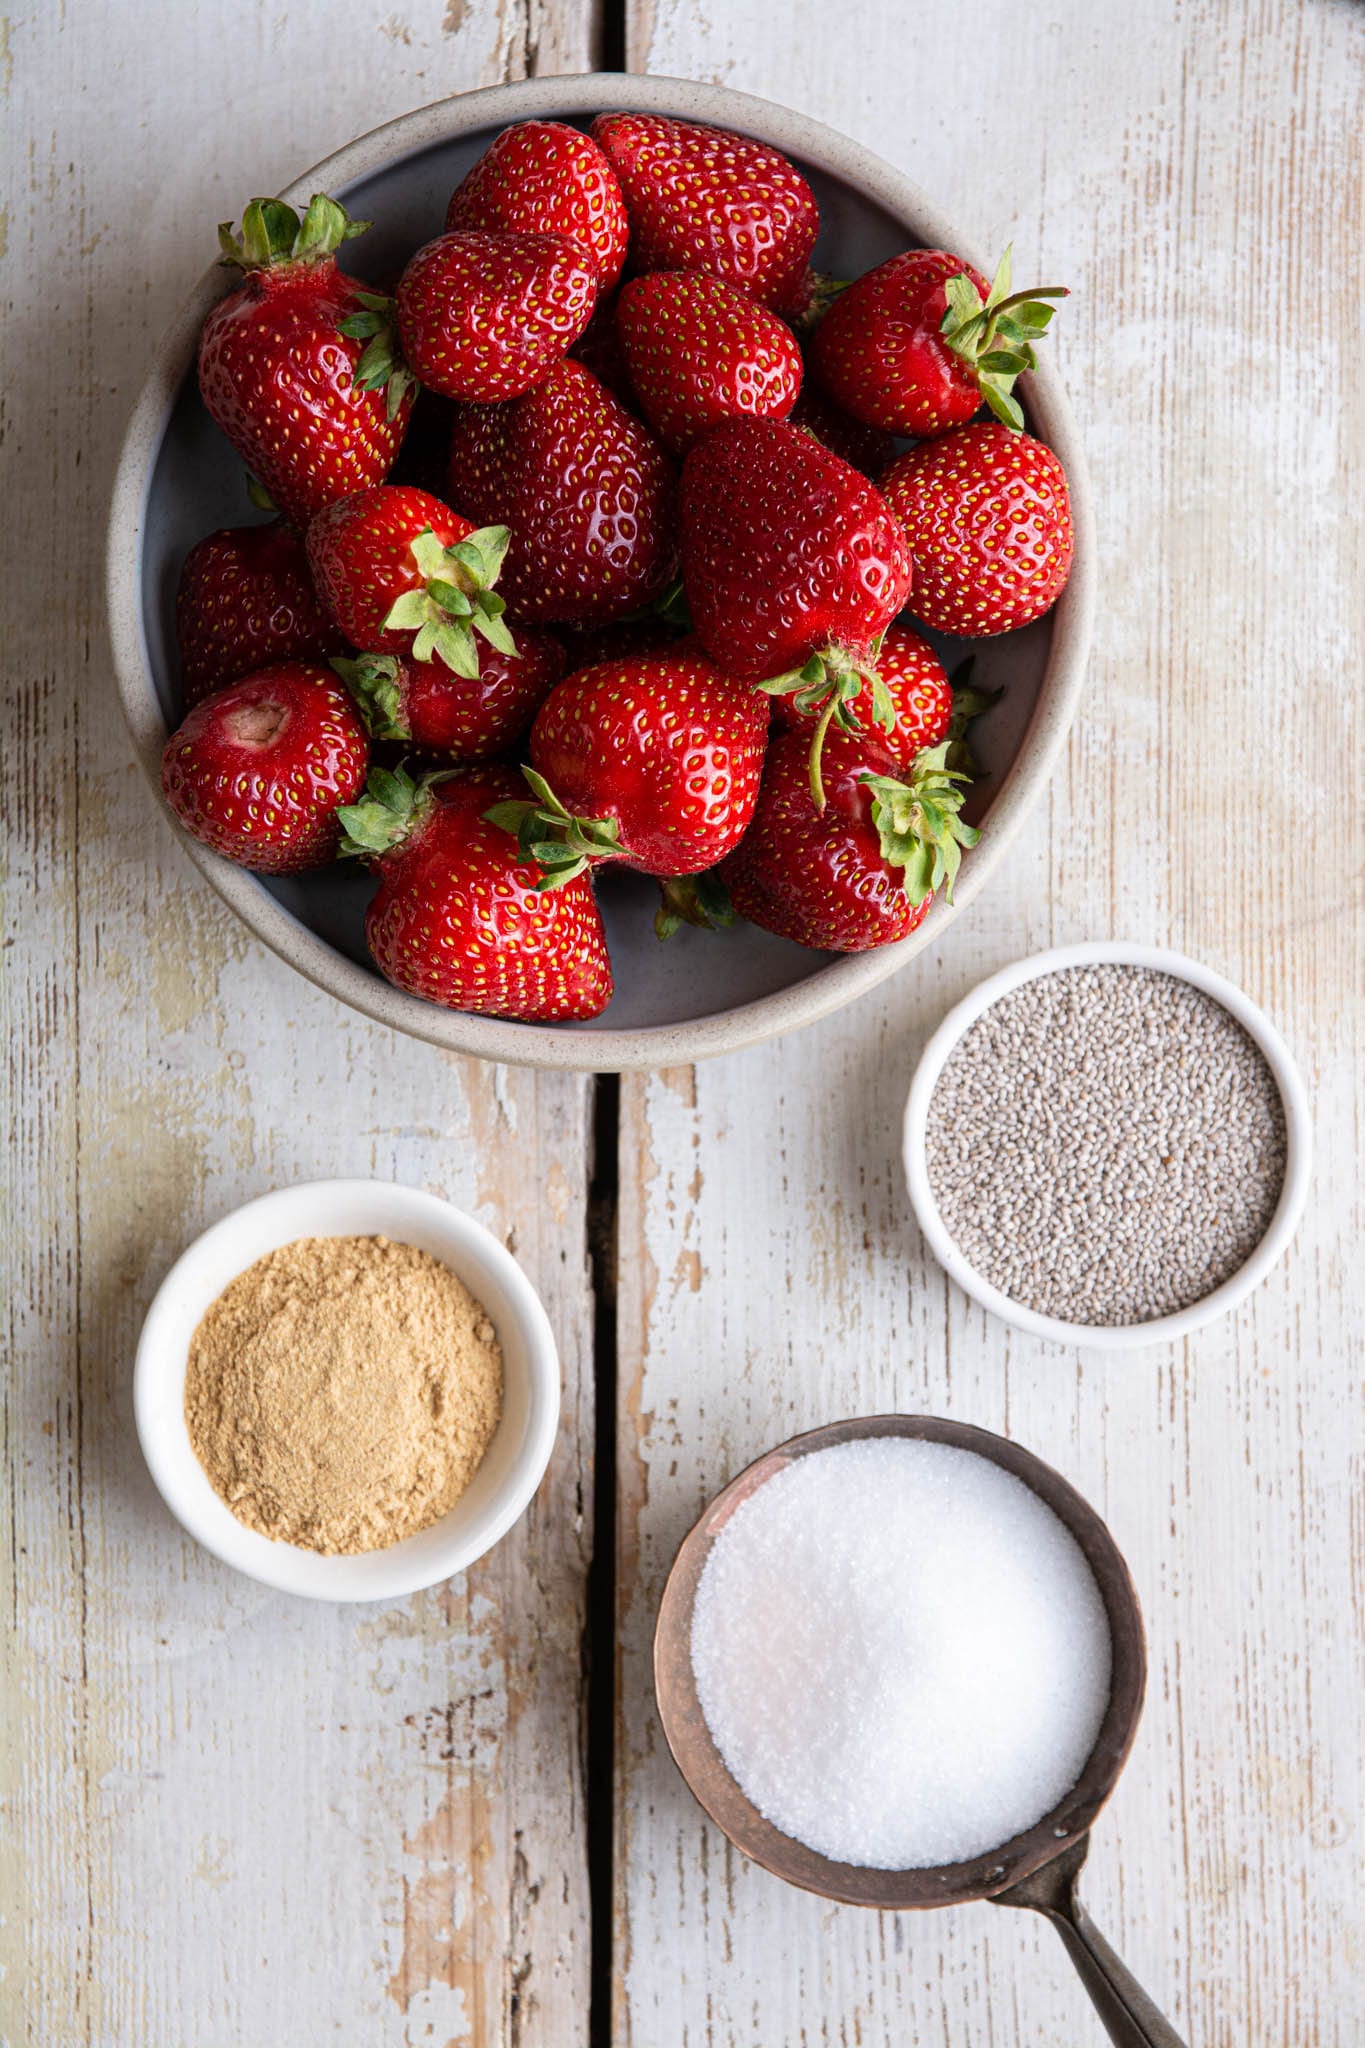 Let’s make an easy strawberry sauce using fresh strawberries. All you need is a blender and 3-4 ingredients. This sauce is ideal for pancakes, crepes, waffles, cheesecake, pound cake, ice cream, and other desserts. 